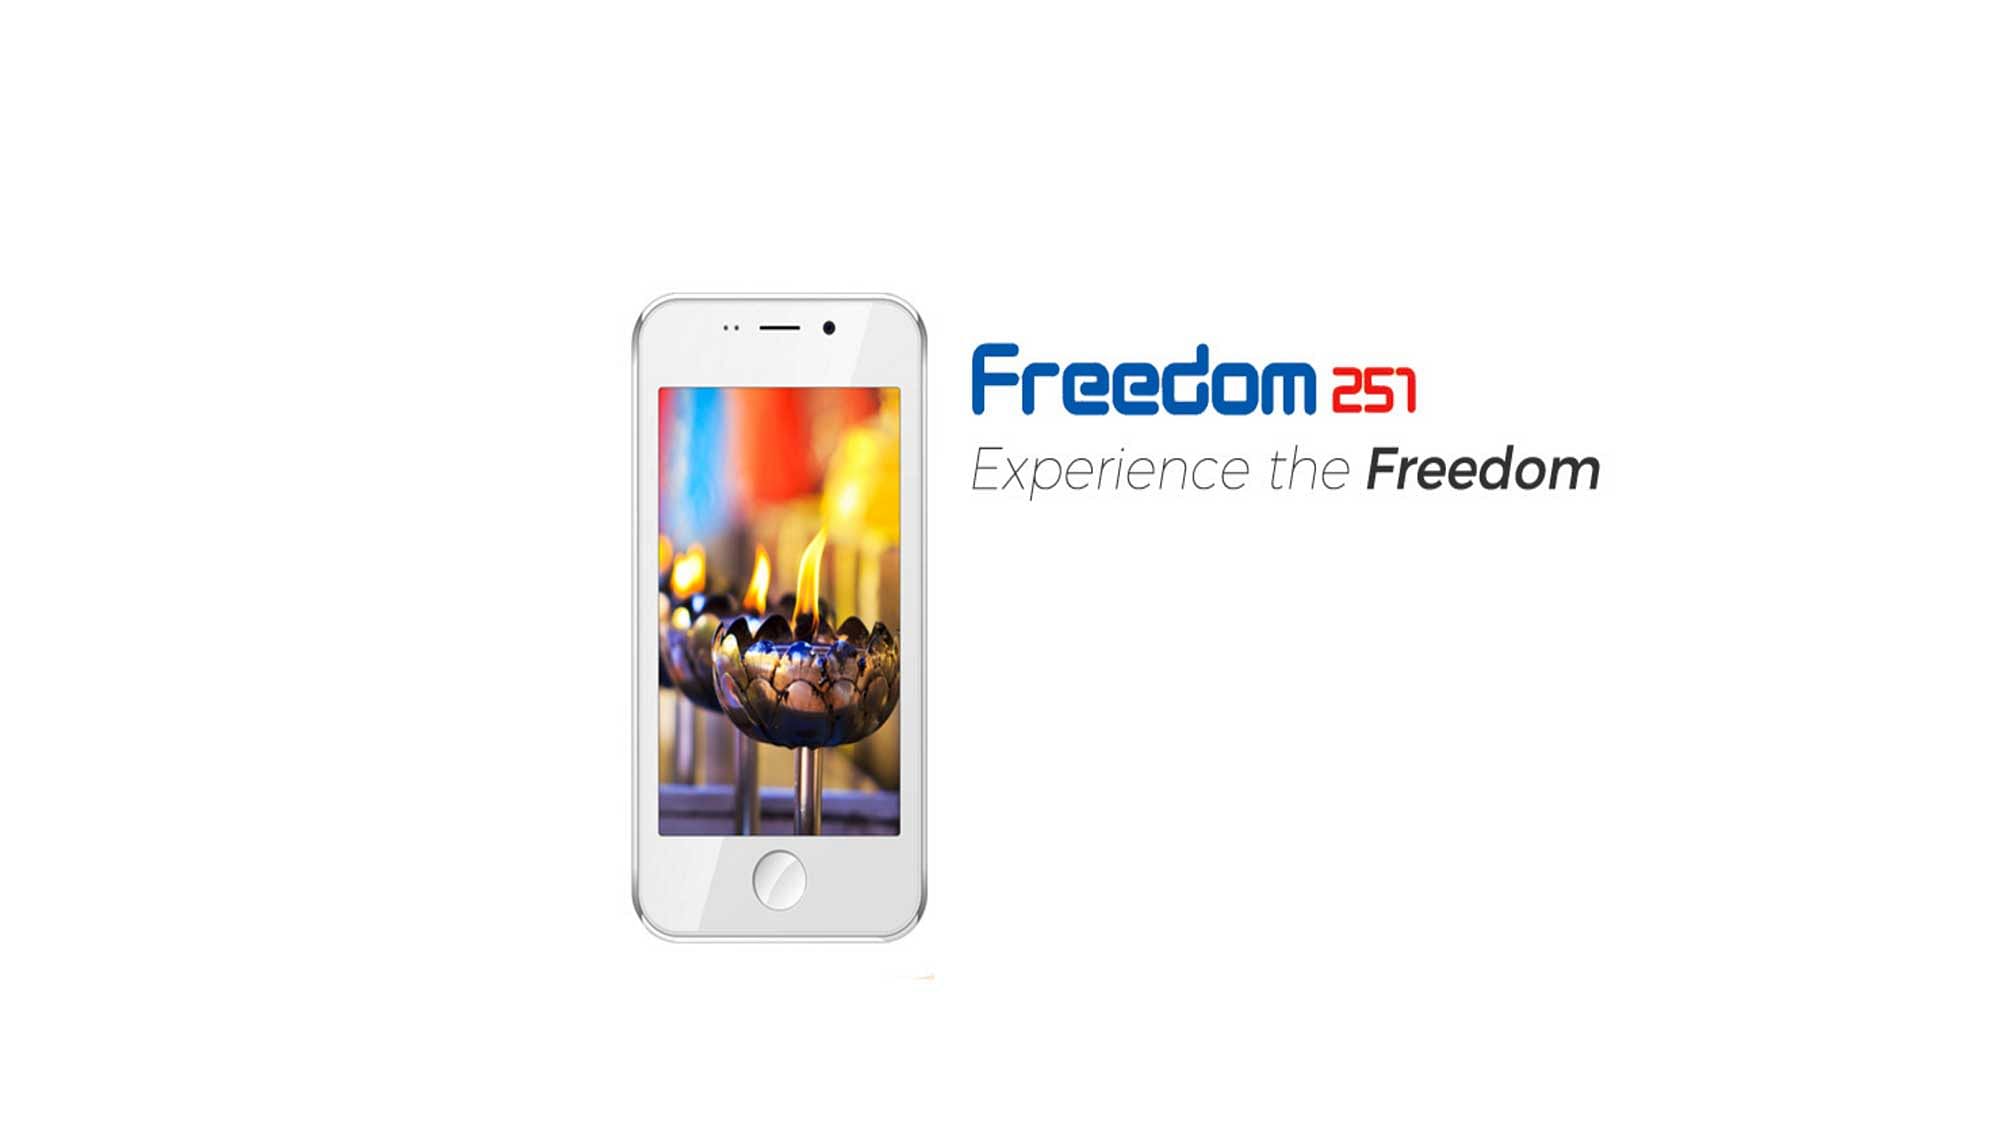 Freedom 251 Phone is a Scam? Our 10 Questions to Ringing Bells - YouTube